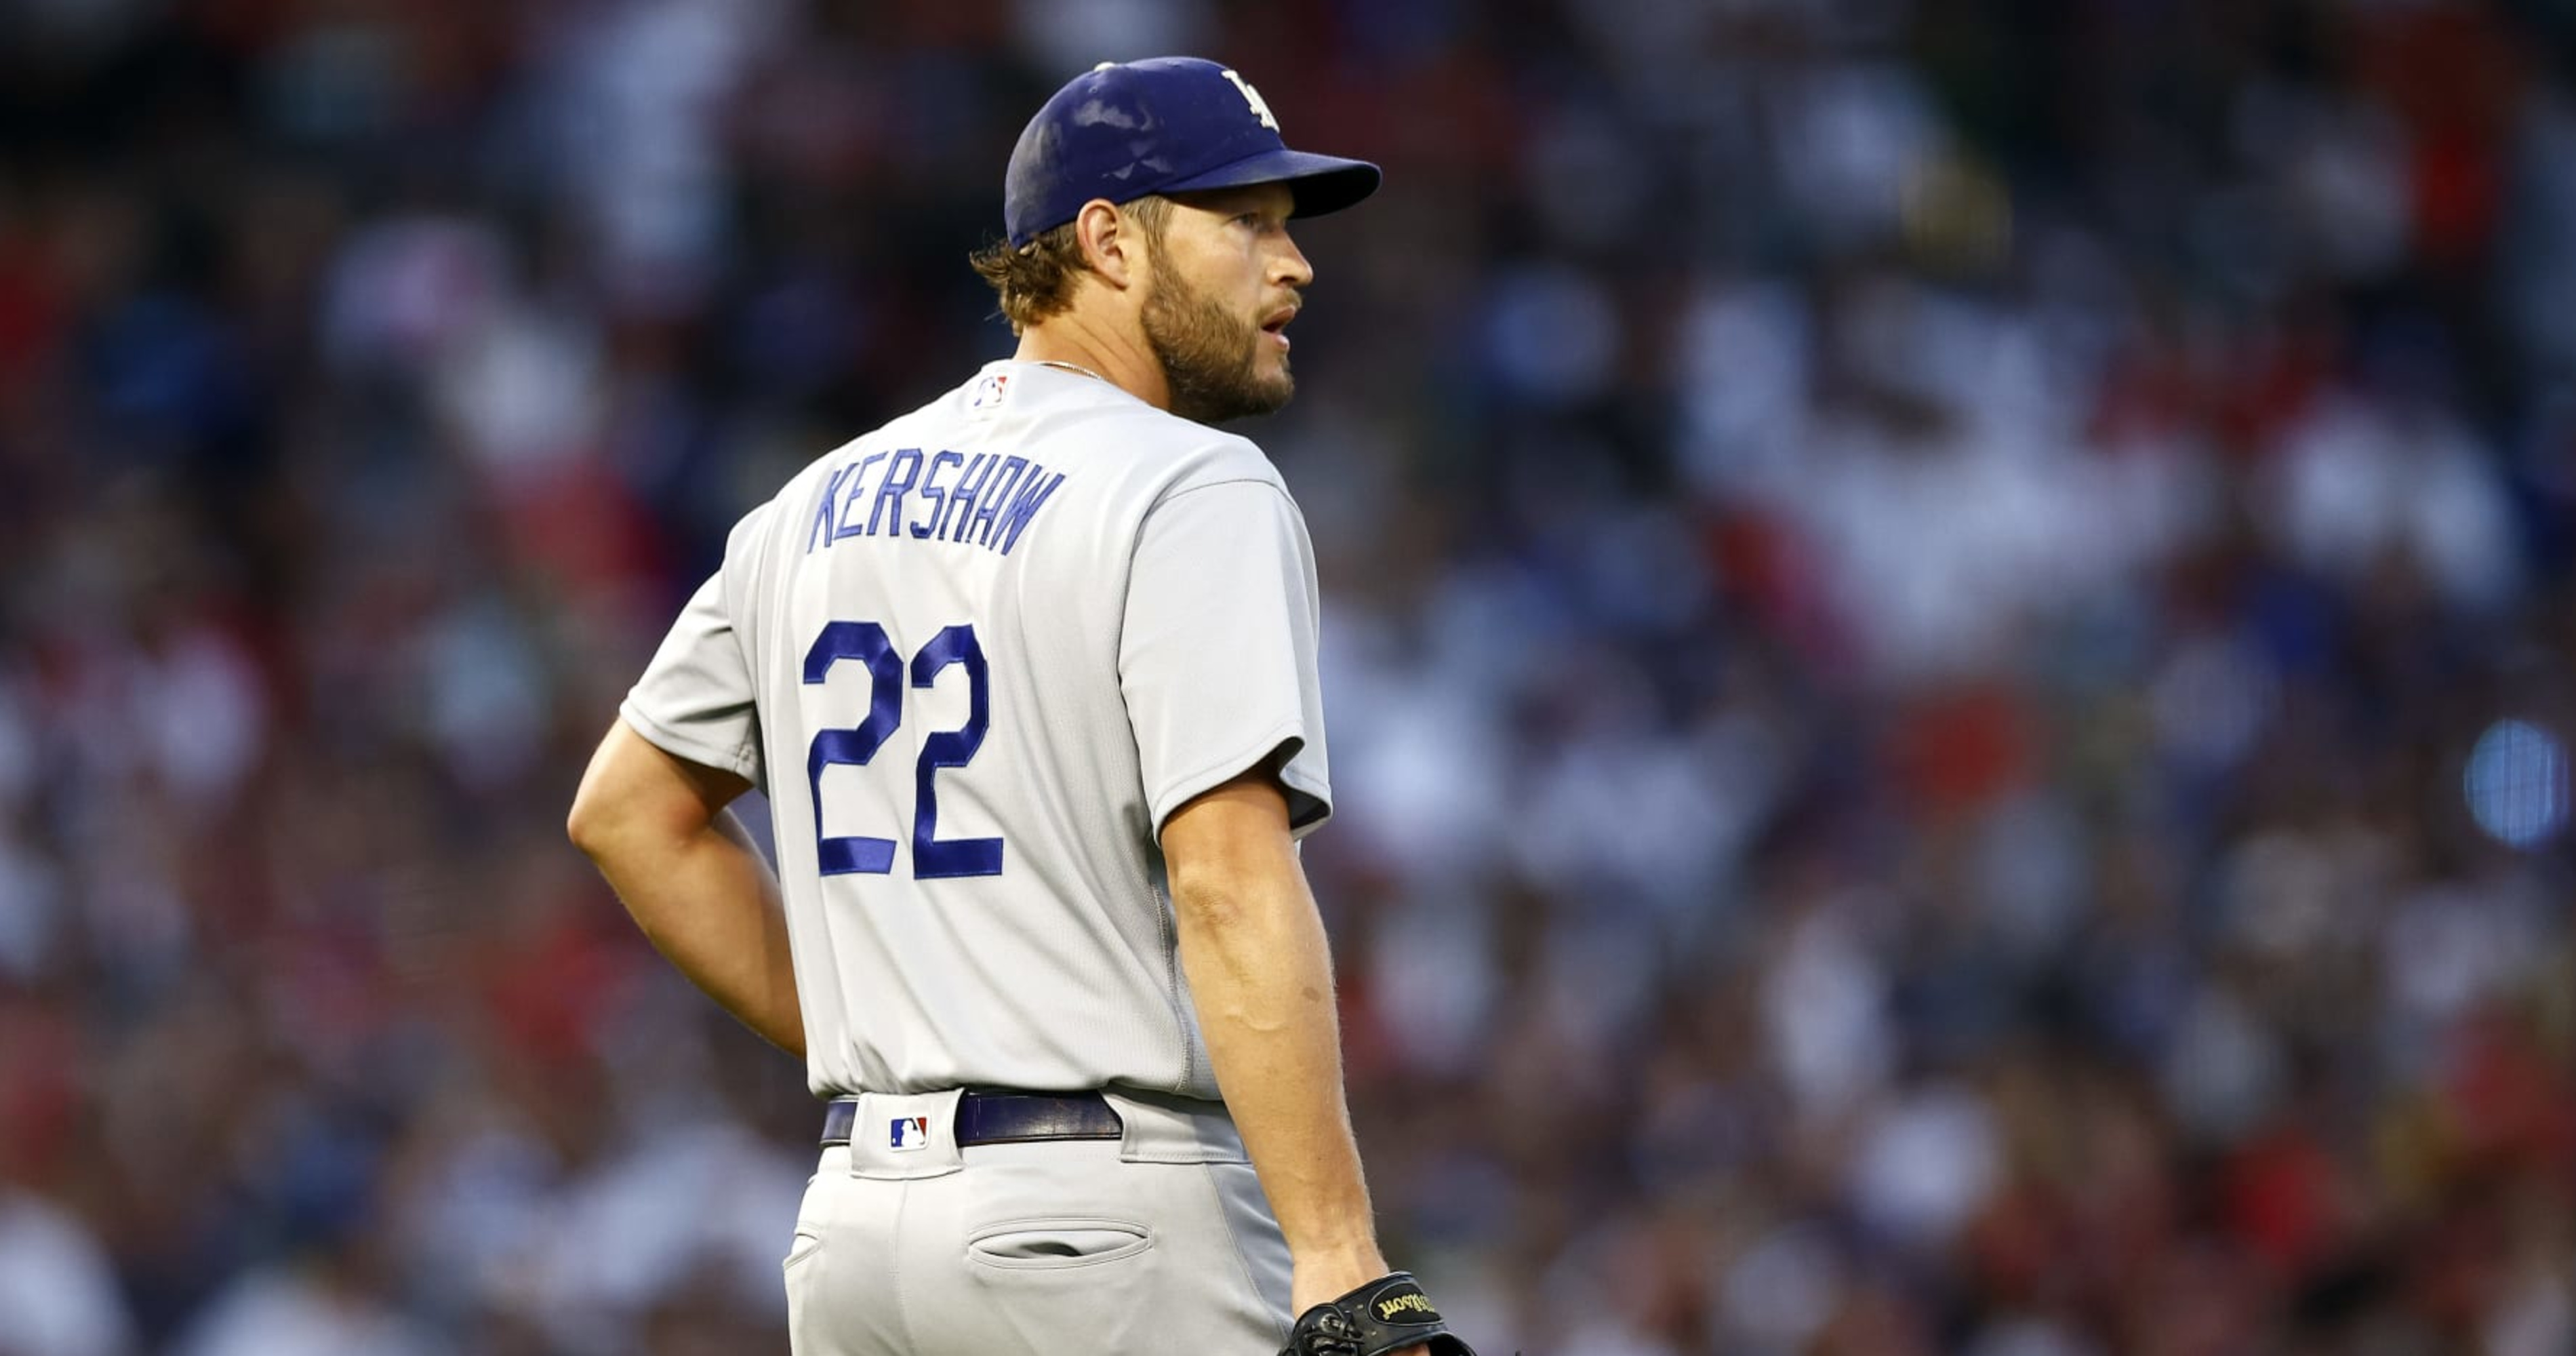 MLB All-Star game 2022: Clayton Kershaw on being named starting pitcher